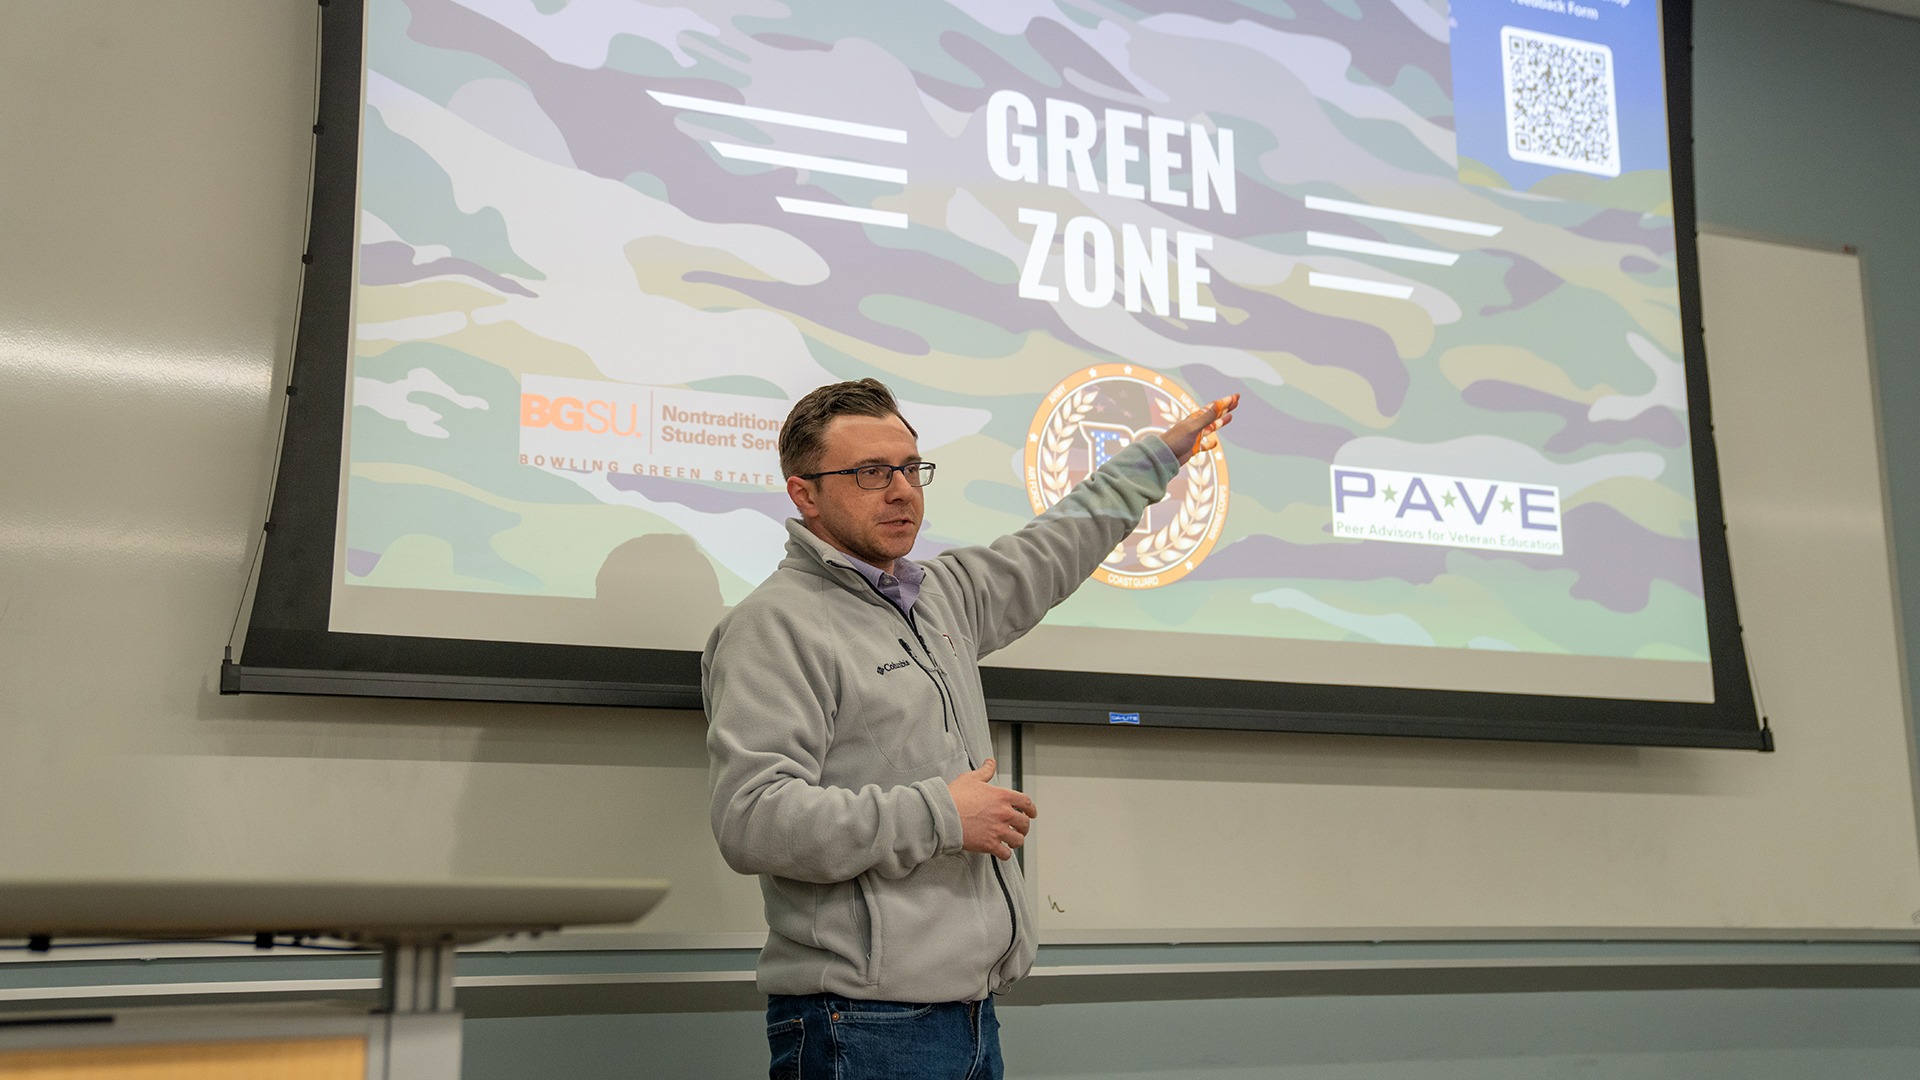 A person stands in front of a presentation screen with the words Green Zone.